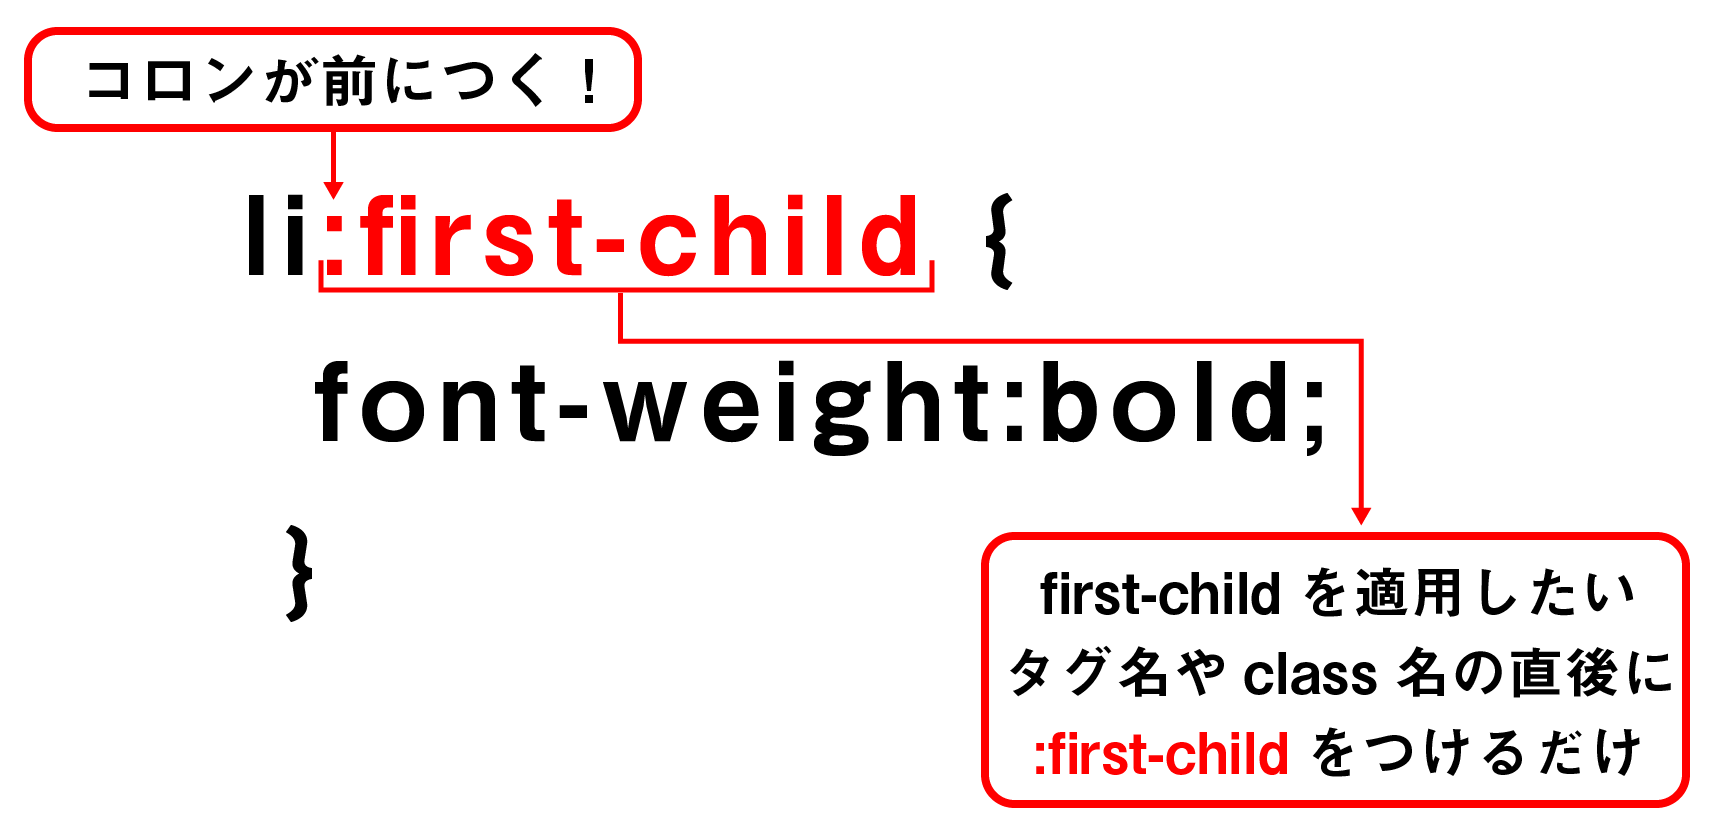 first-childの説明